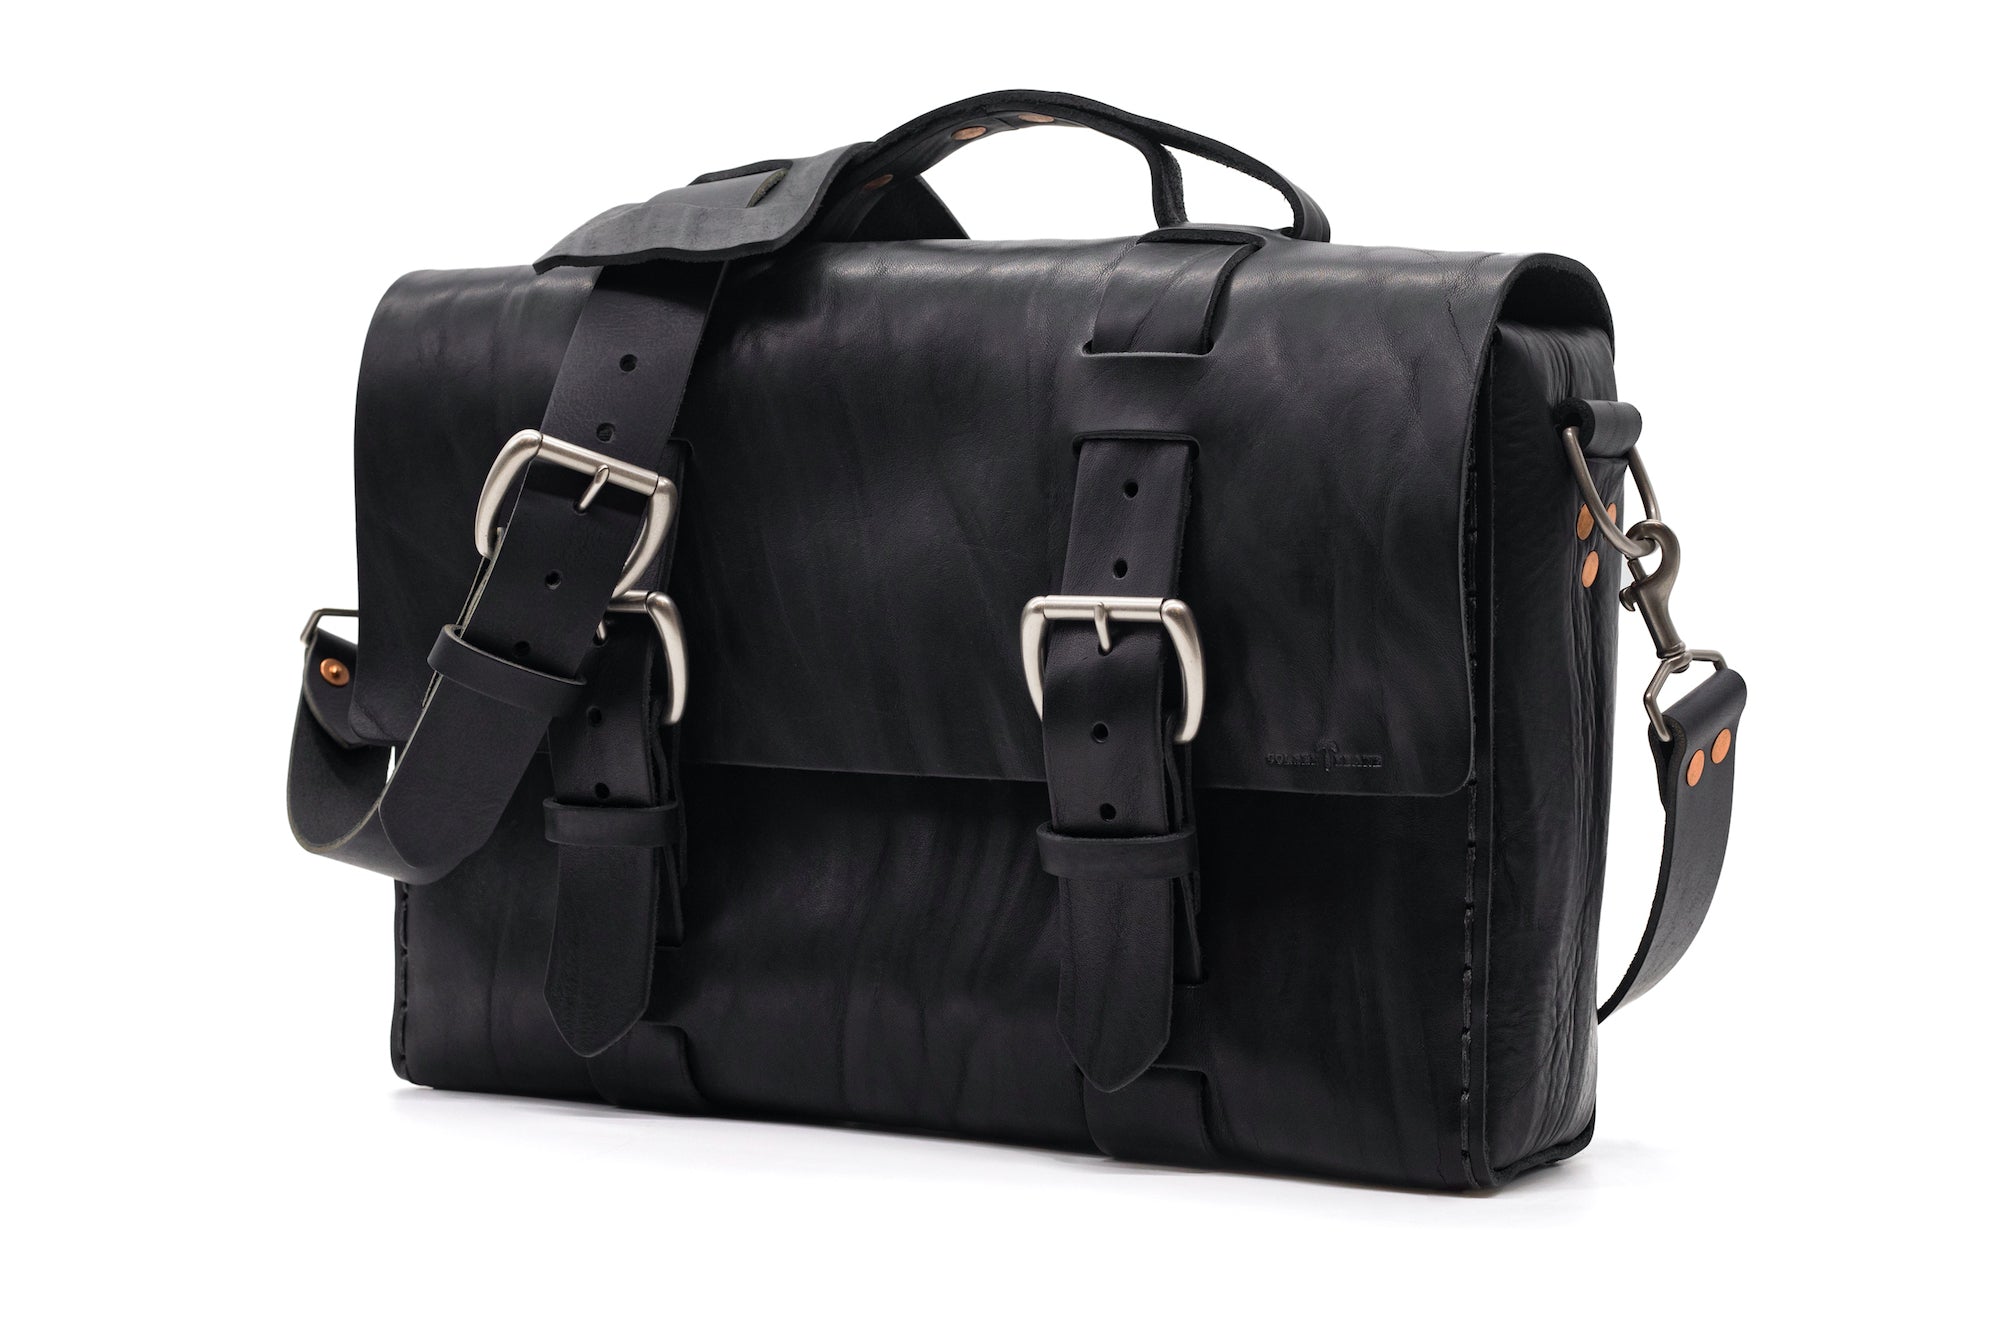 Limited Edition No. 4313 - Minimalist Standard Leather Satchel in Commonwealth Black - 5 MADE, ONLY 4 LEFT